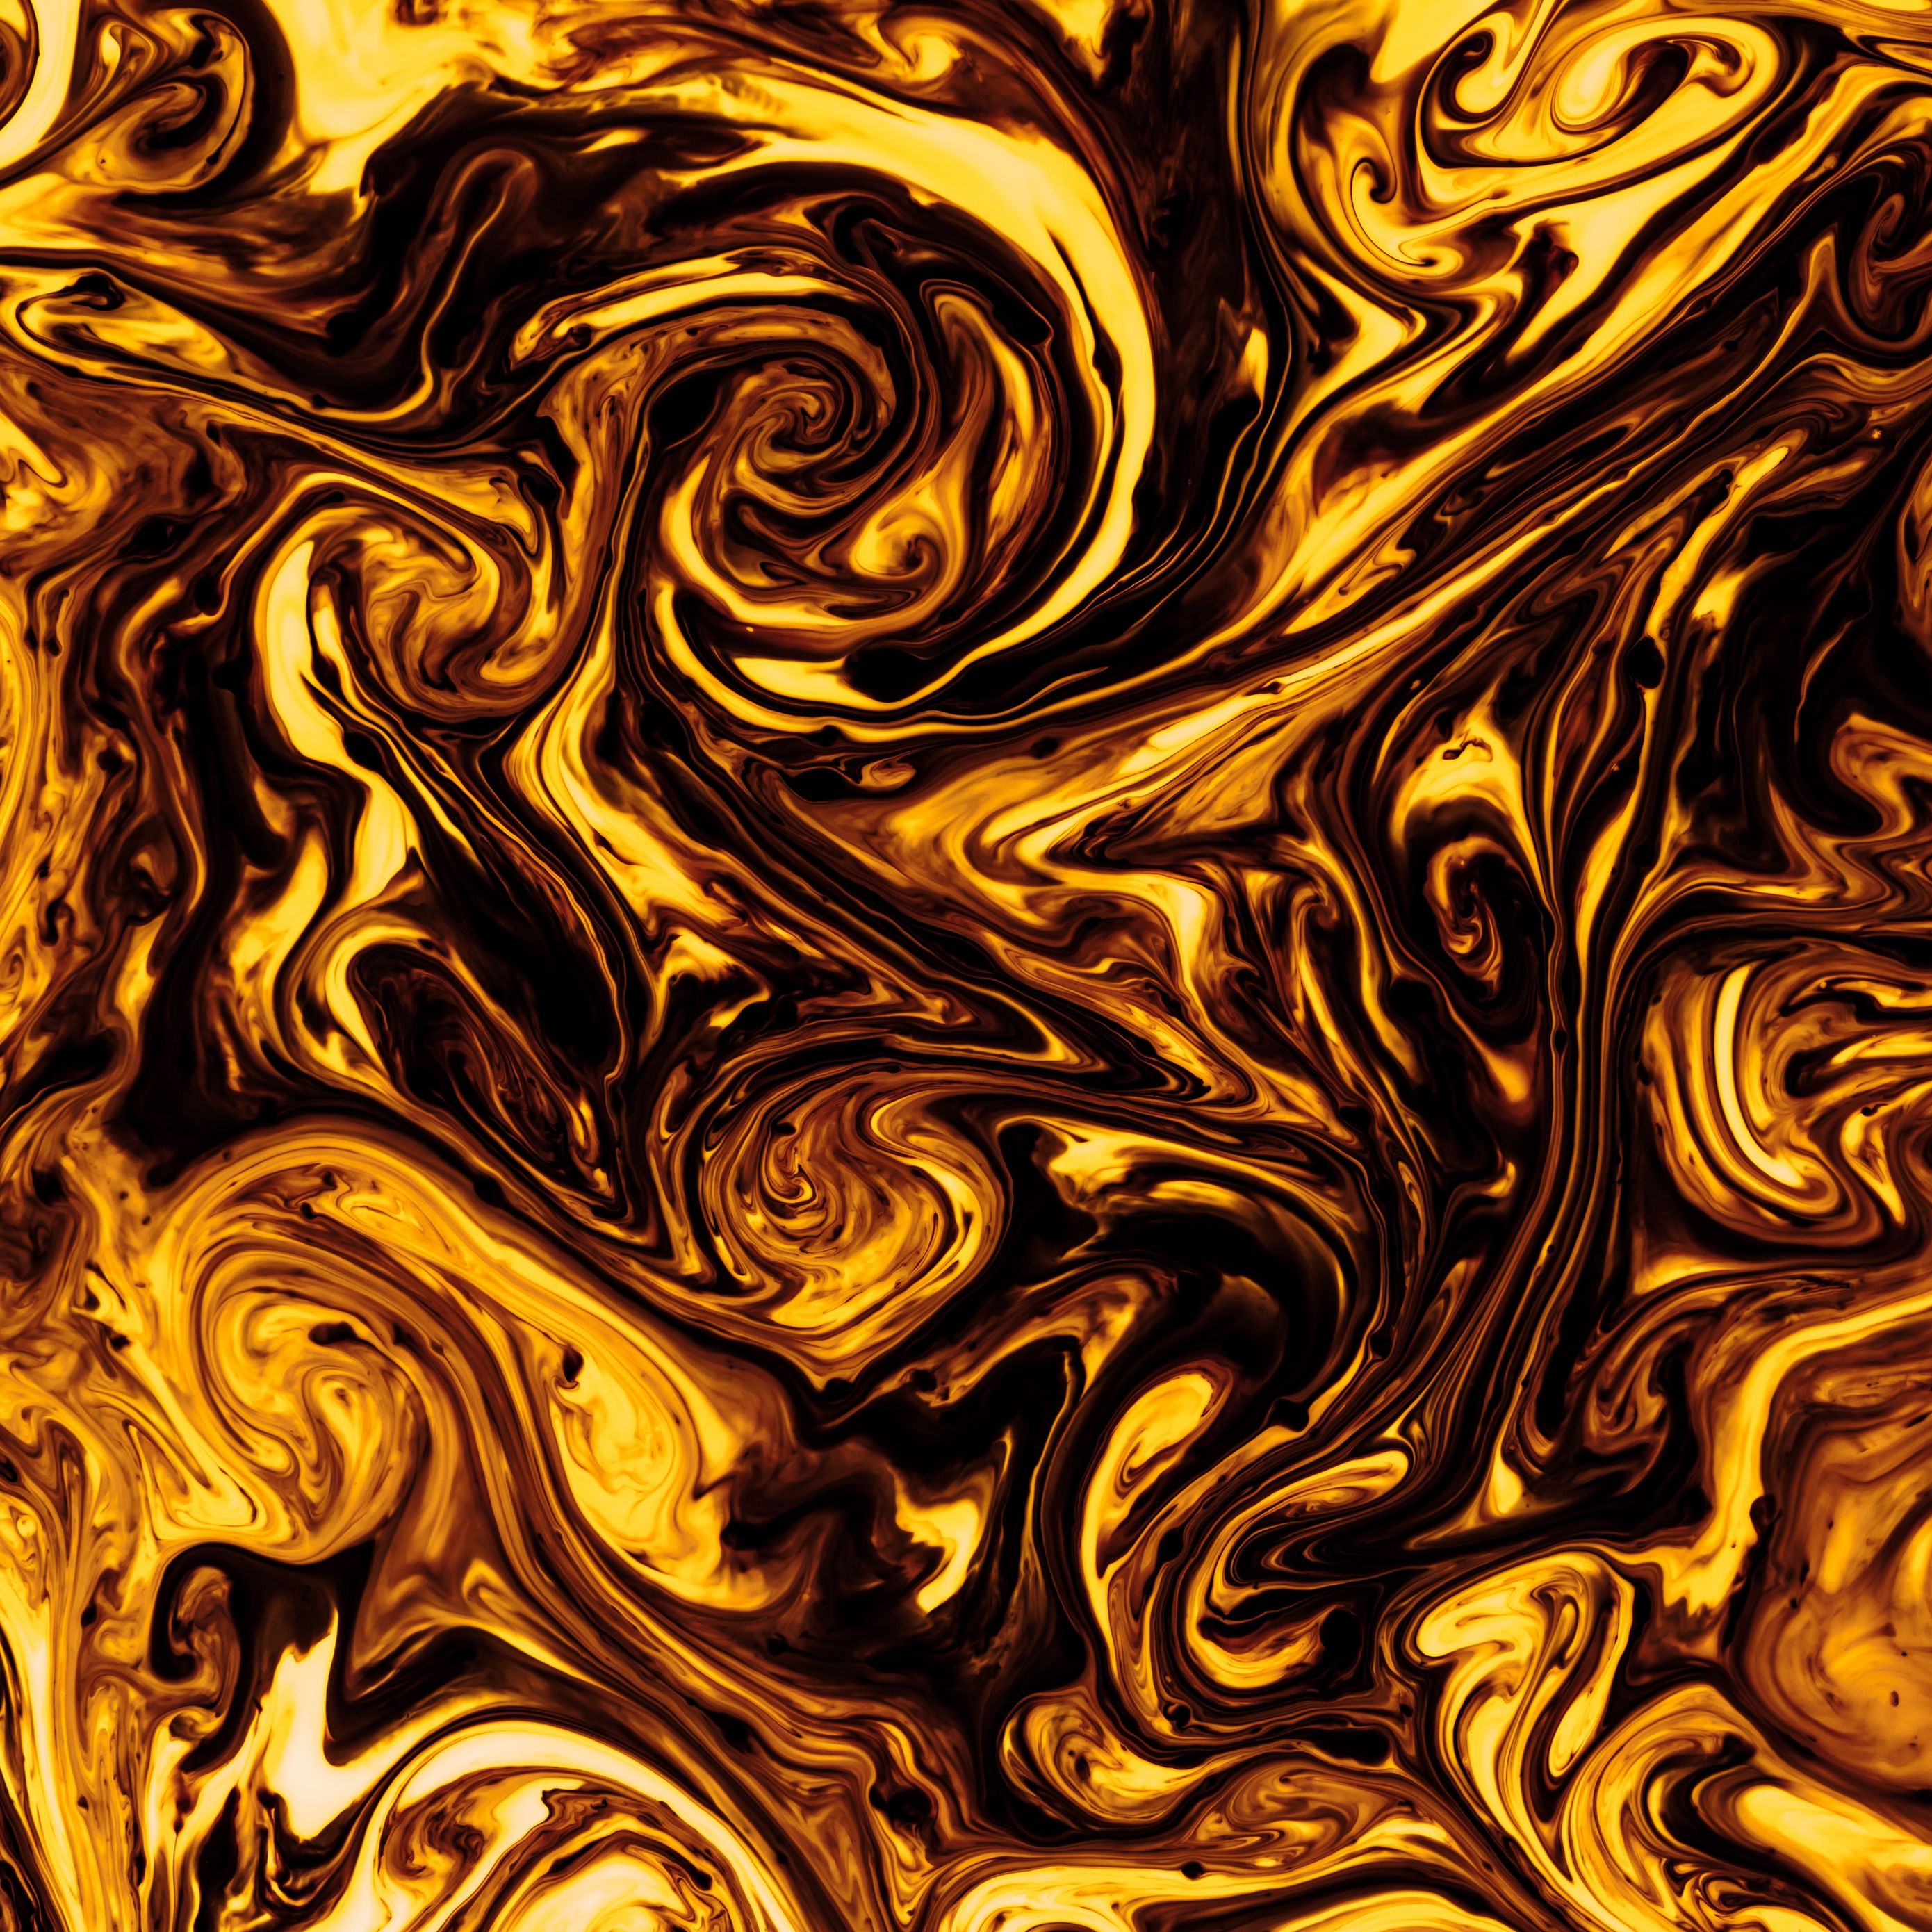 A close up of an abstract pattern in gold and black - Gold